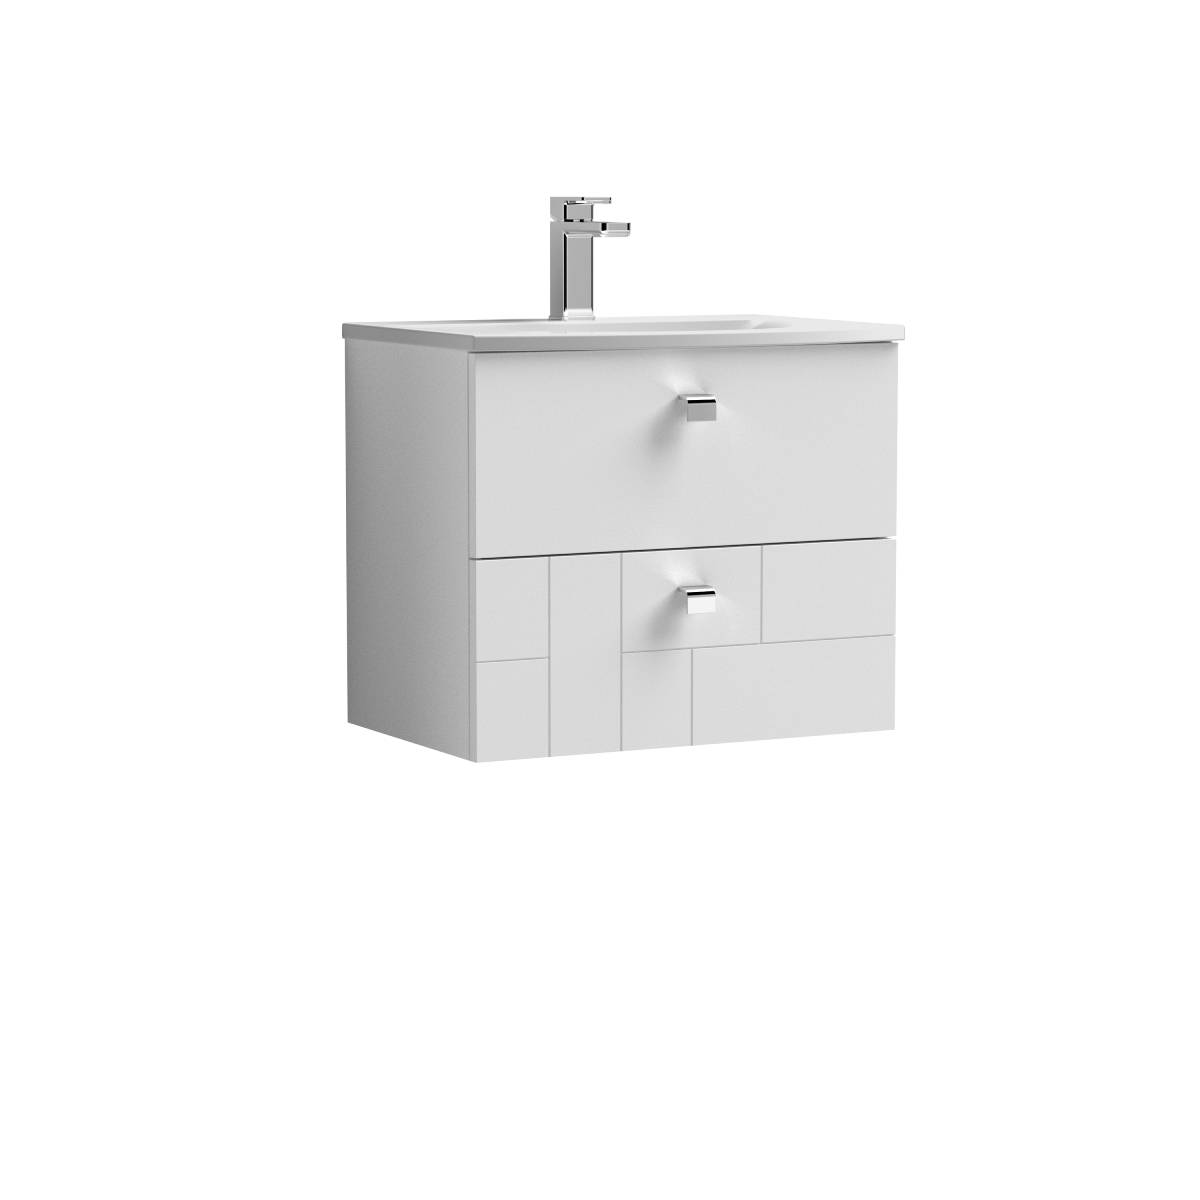 Nuie Blocks 600mm Wall Mounted Vanity Unit & Curved Basin - Satin White (13228)